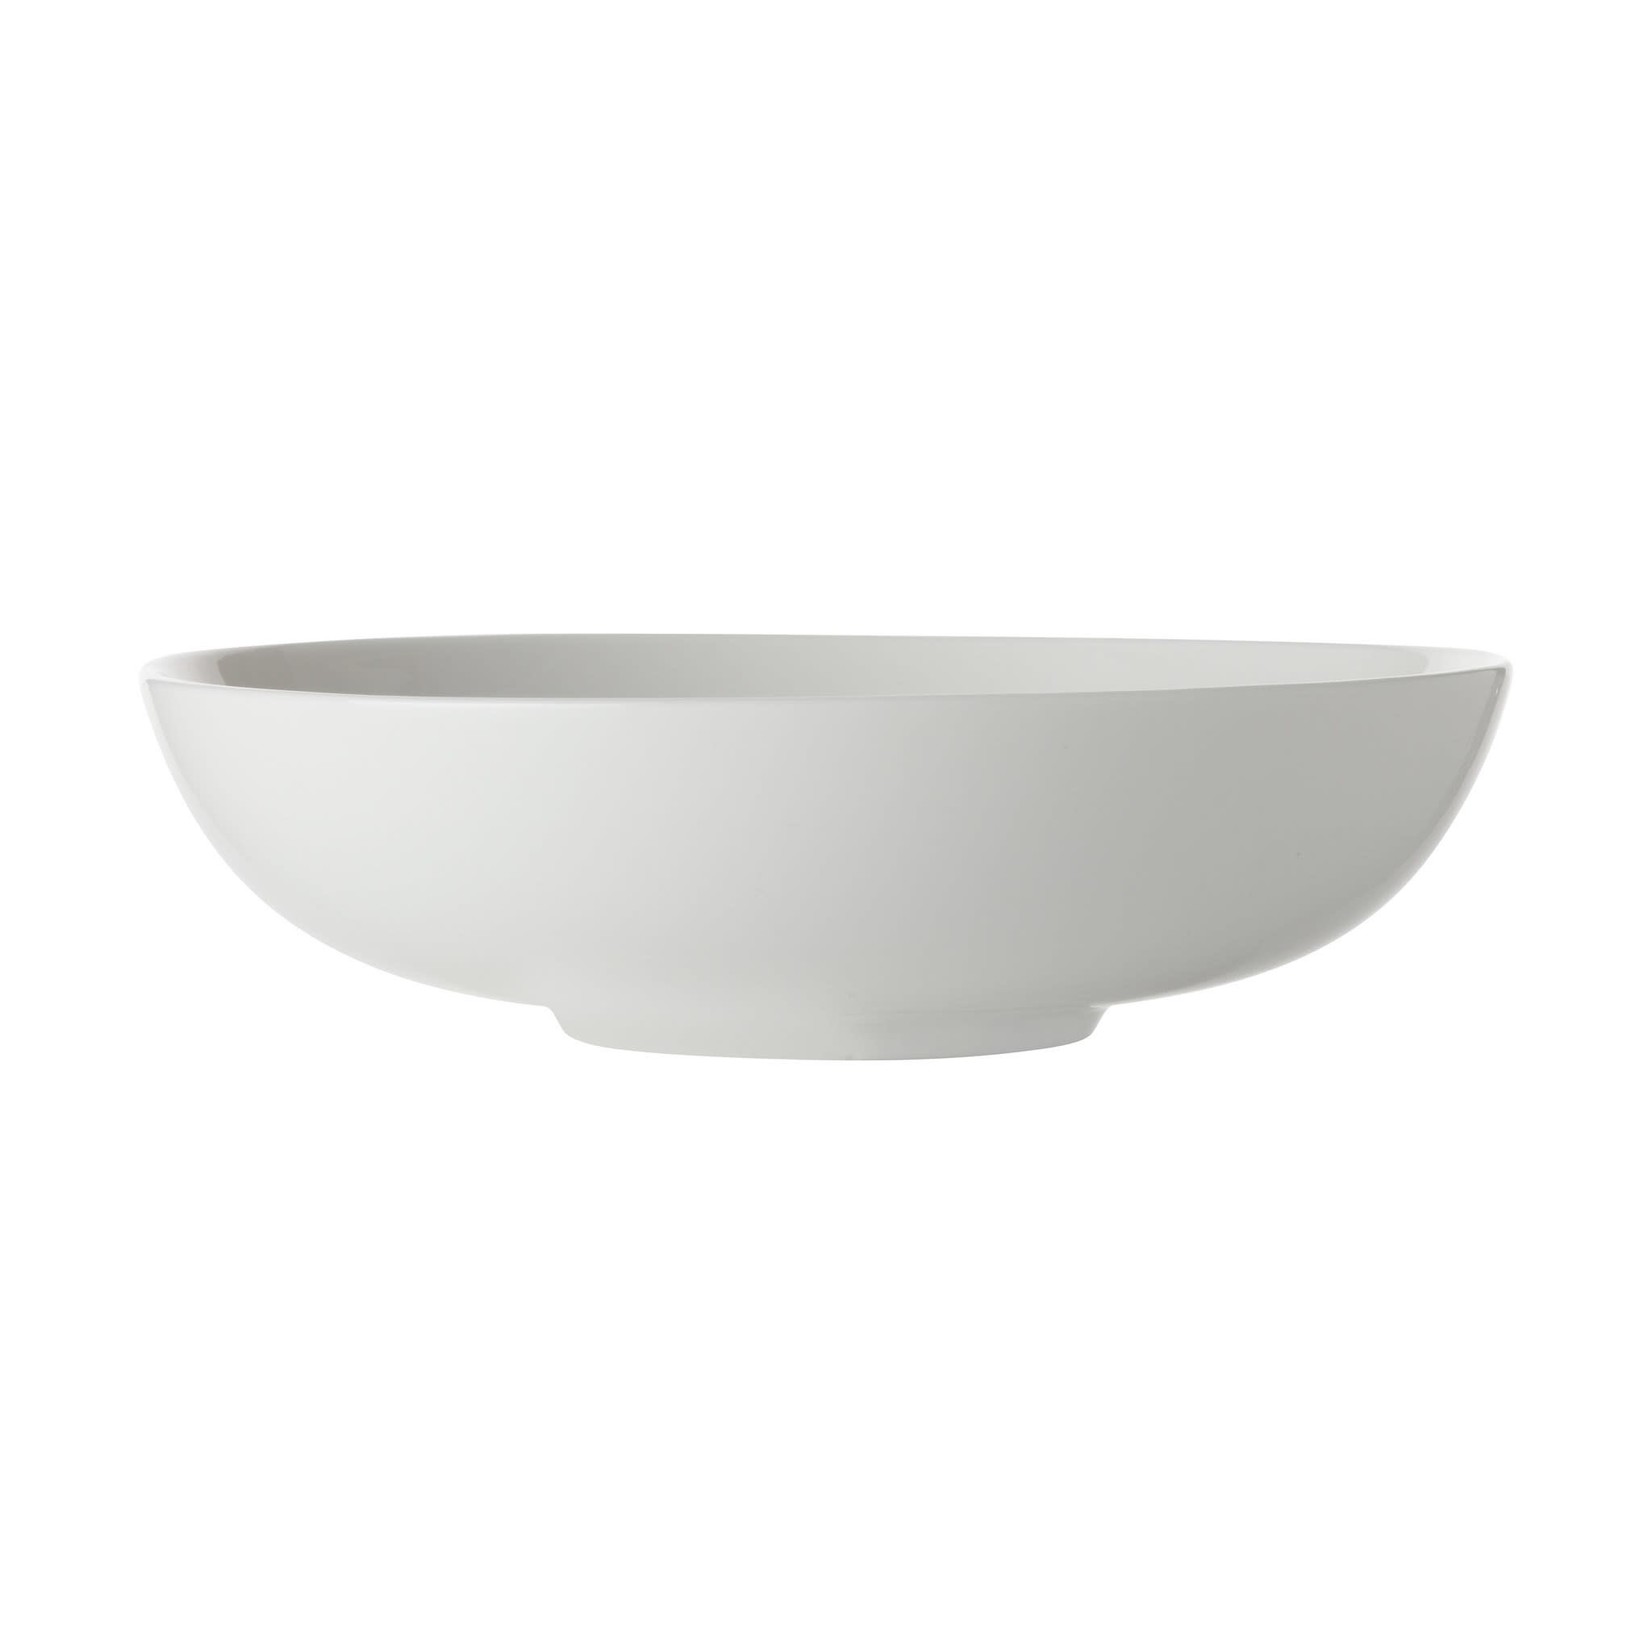 MAXWELL WILLIAMS MAXWELL WILLIAMS Coupe Shallow Bowl White 18.5cm